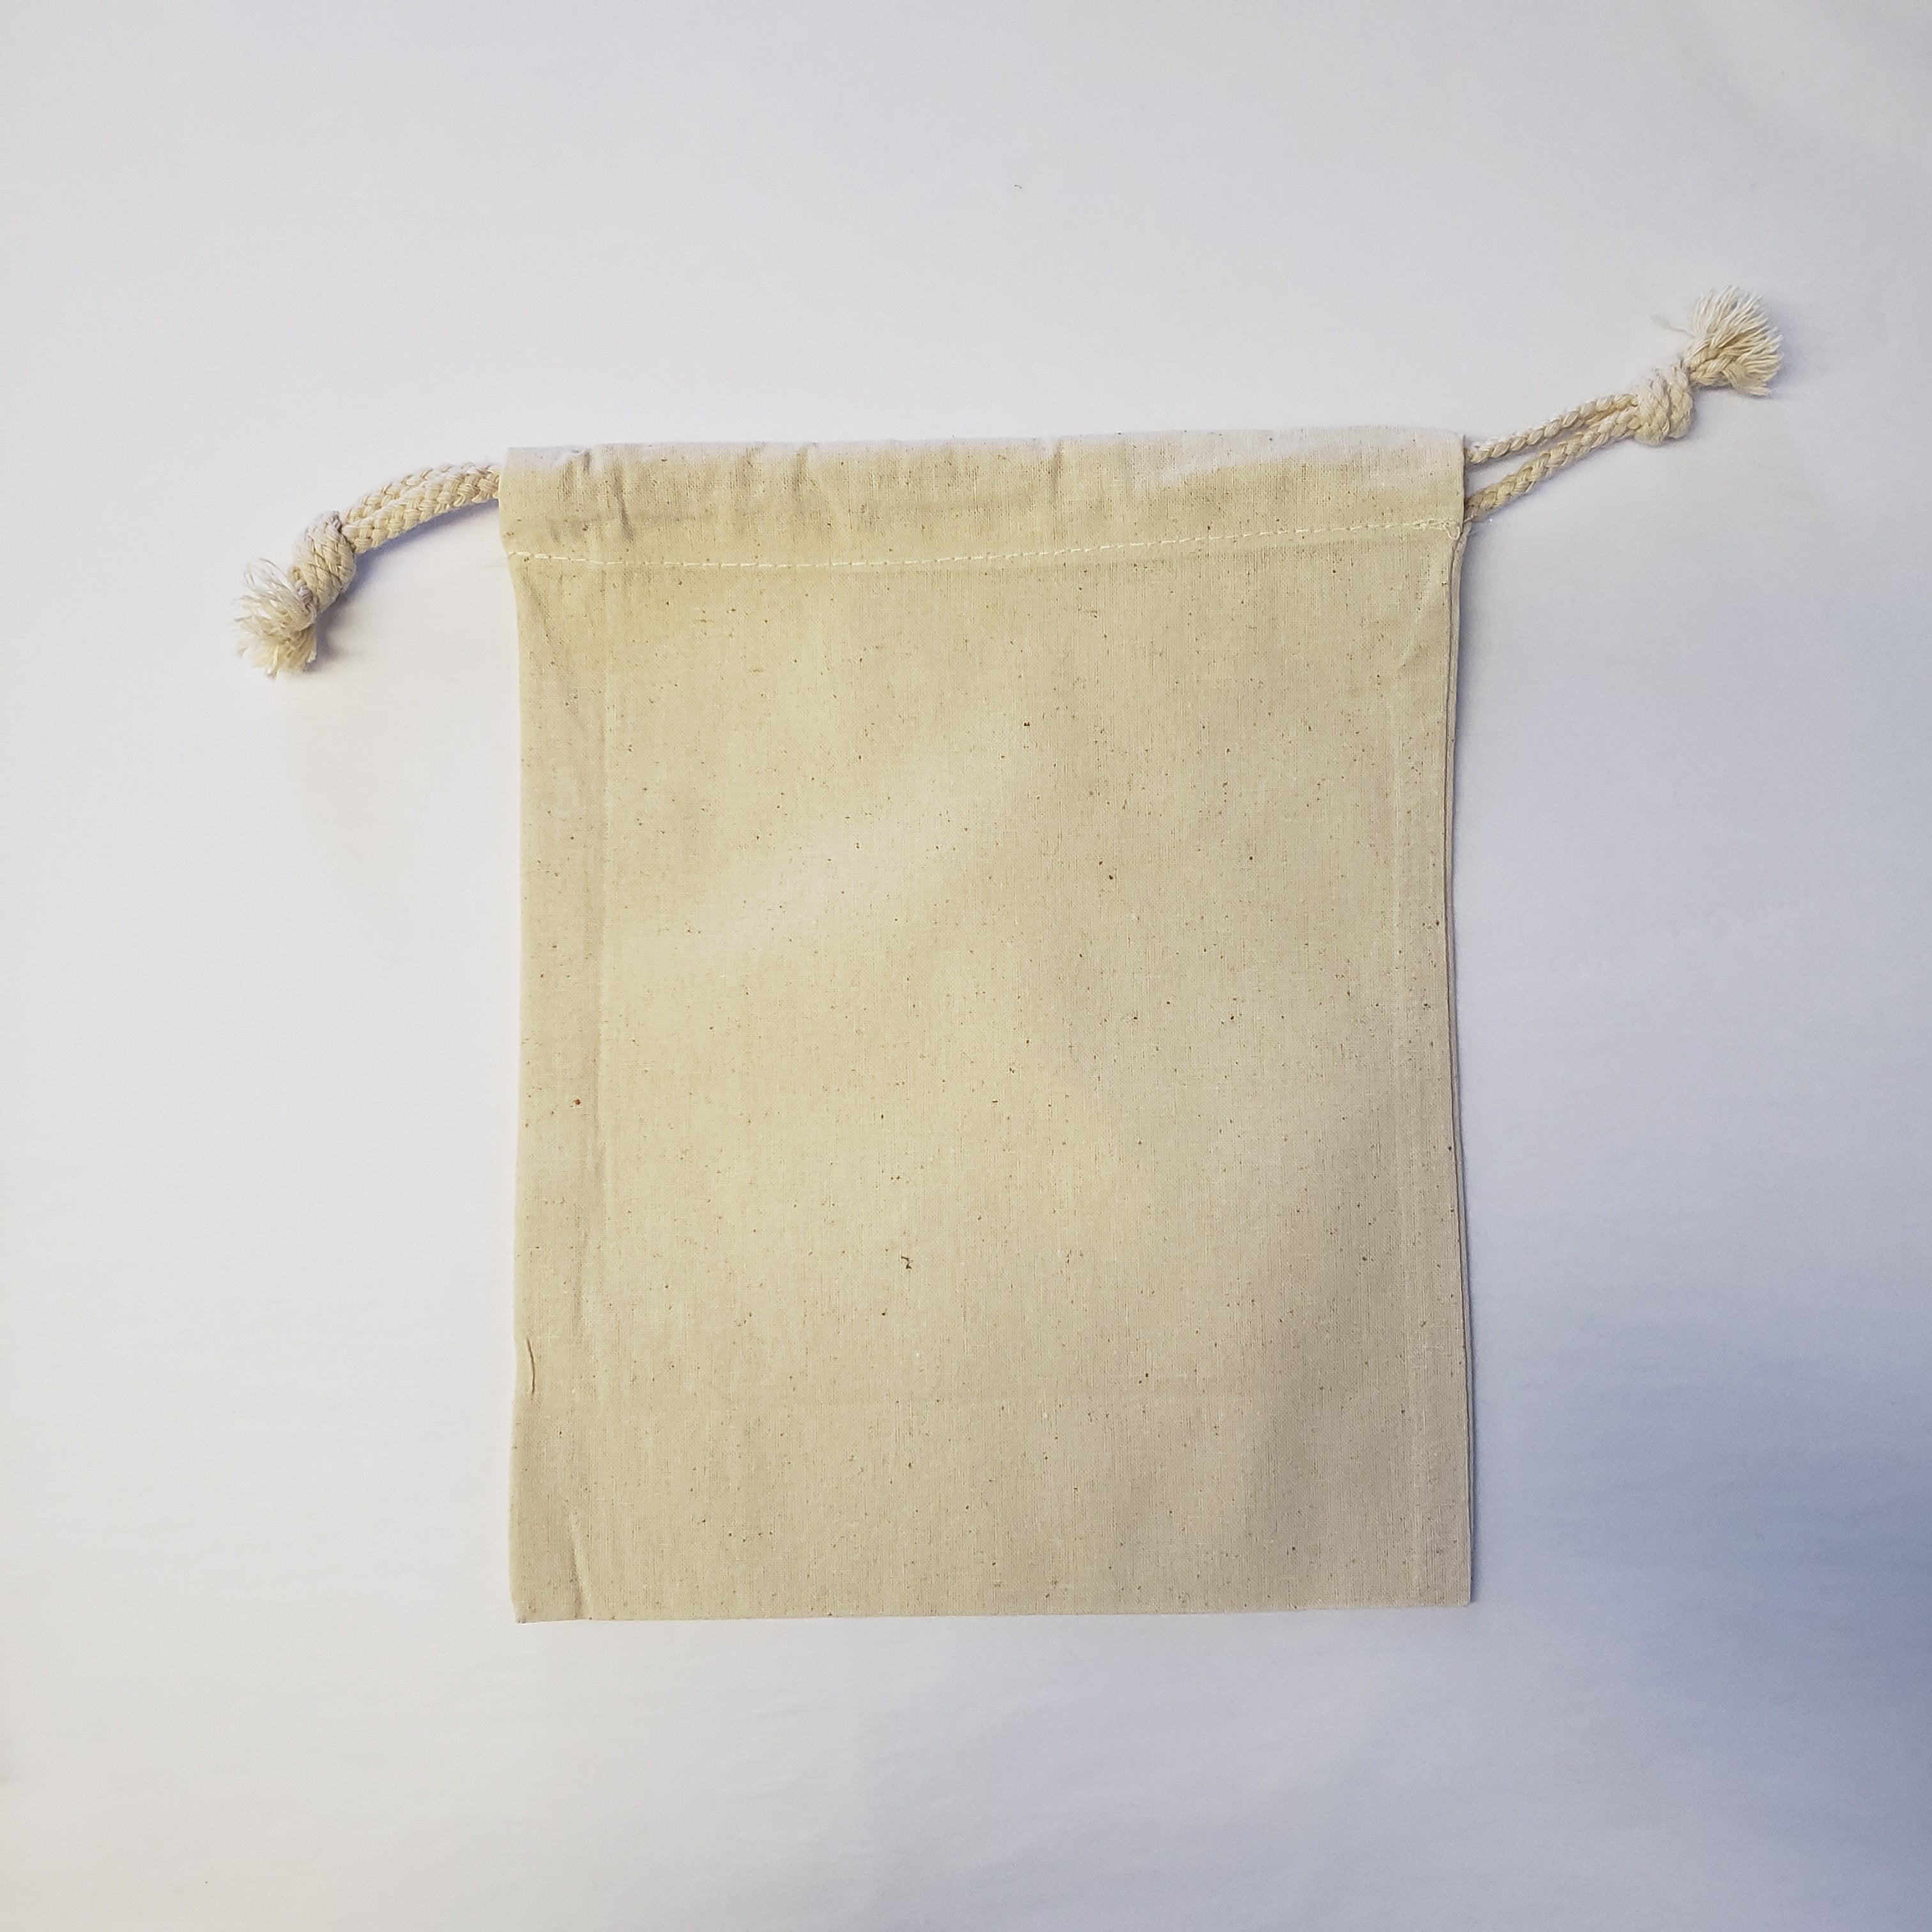 Small Blank Sack 8 x 10 Inches - 100% Natural Cotton-Design Blanks